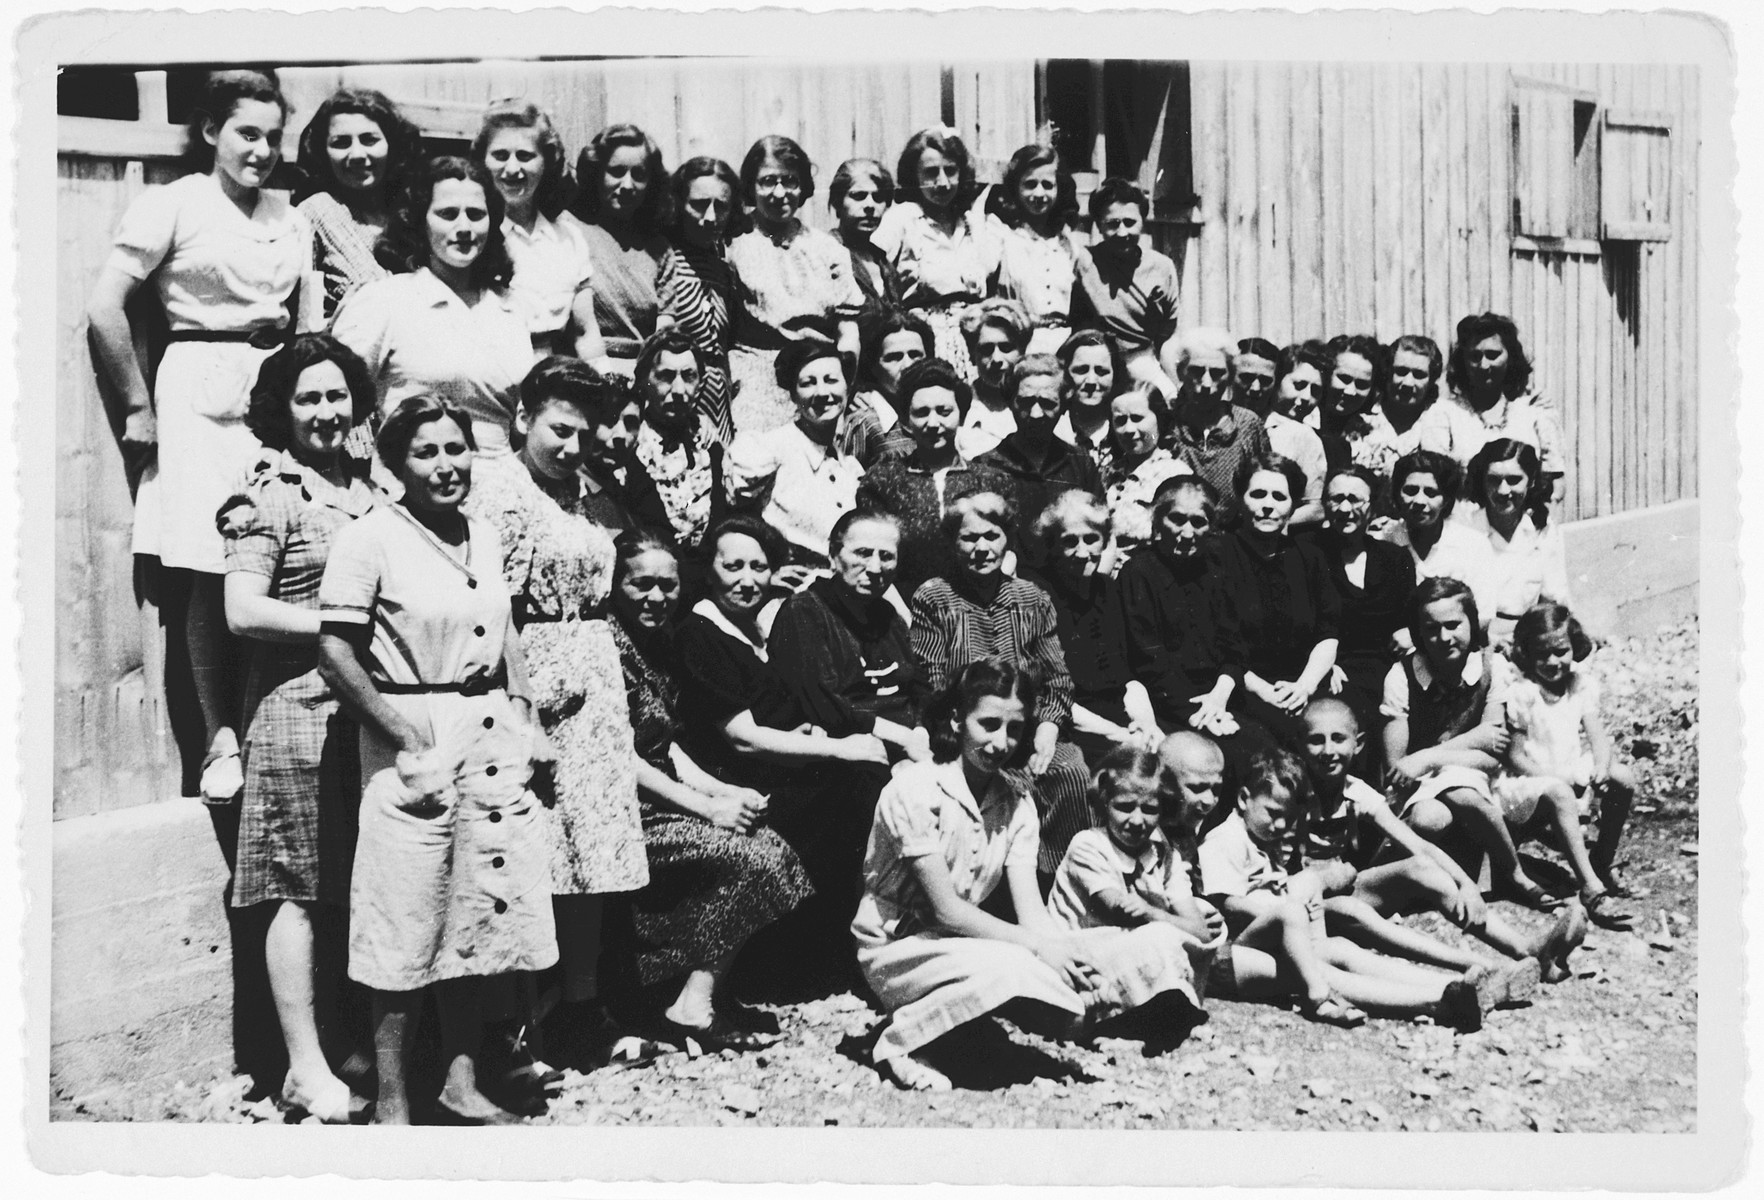 Group portrait of female and child prisoners standing and sitting outside a barrack in the Kraljevica concentration camp.

Among those pictured are Nada and Lea Gostl, school friends of the donor. Also pictured are Mira and Zora Mahler and their mother, Luisa Mahler.